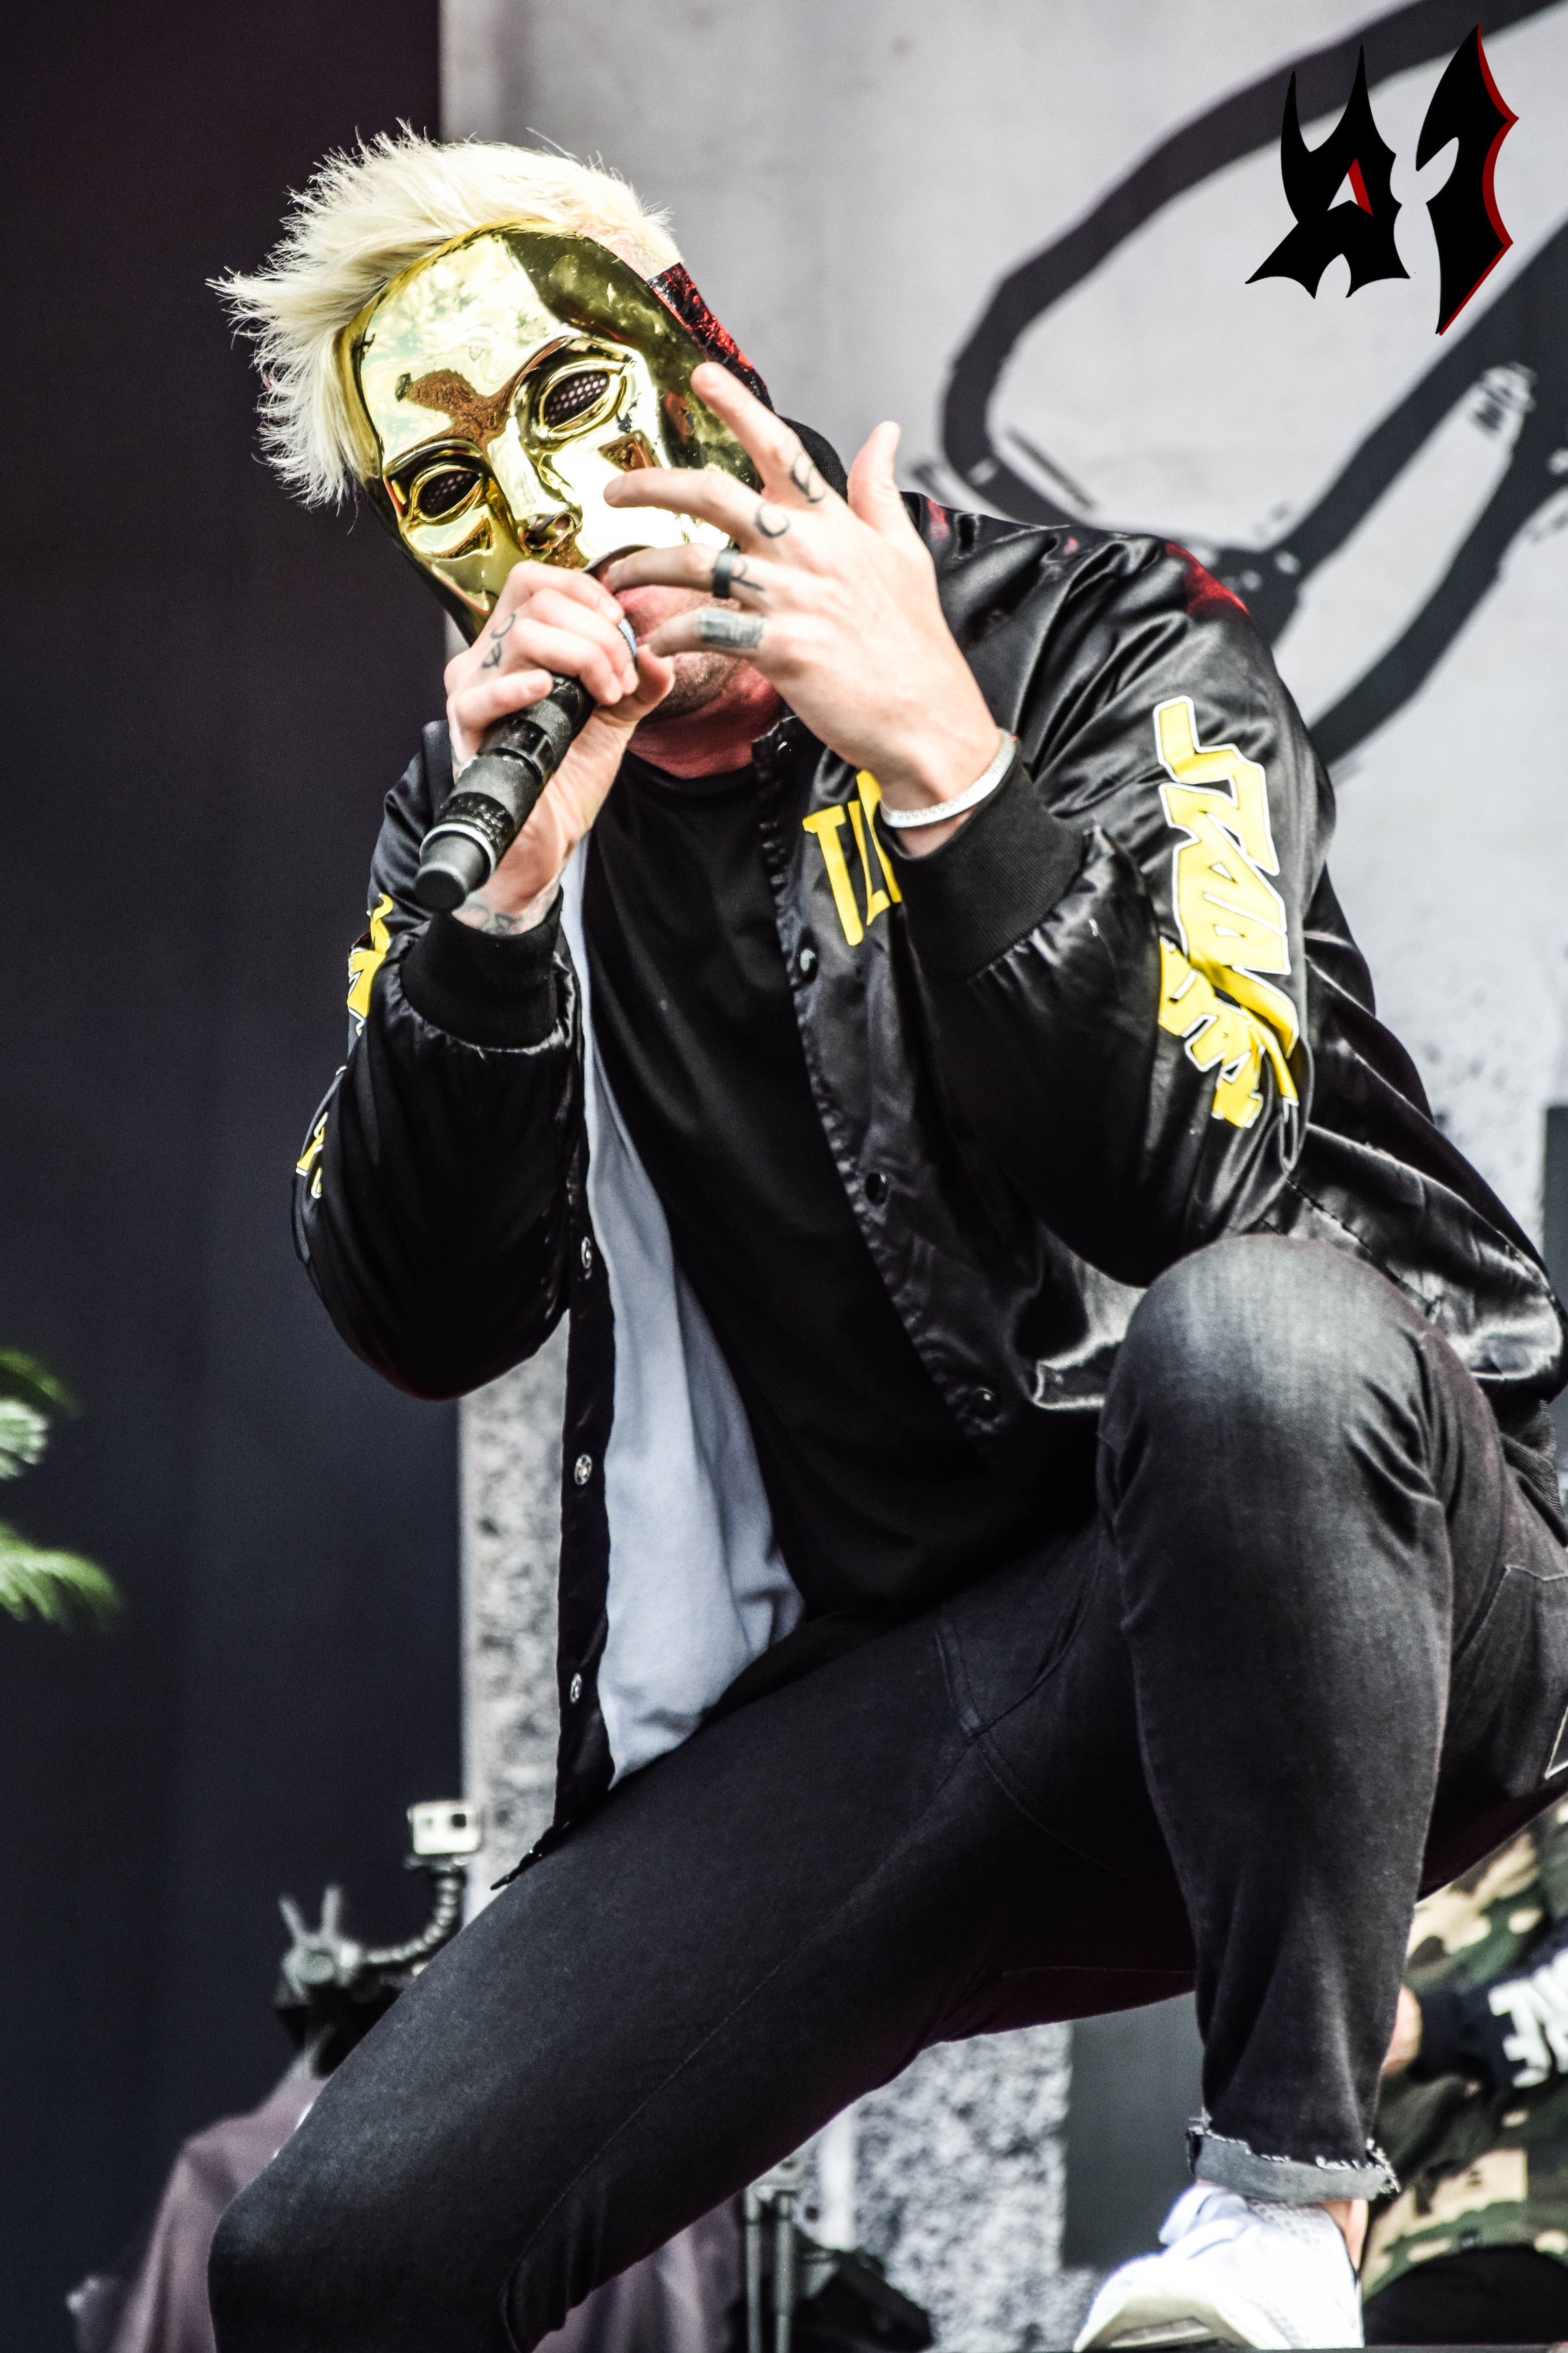 Donwload 2018 – Day 2 - Hollywood Undead 20